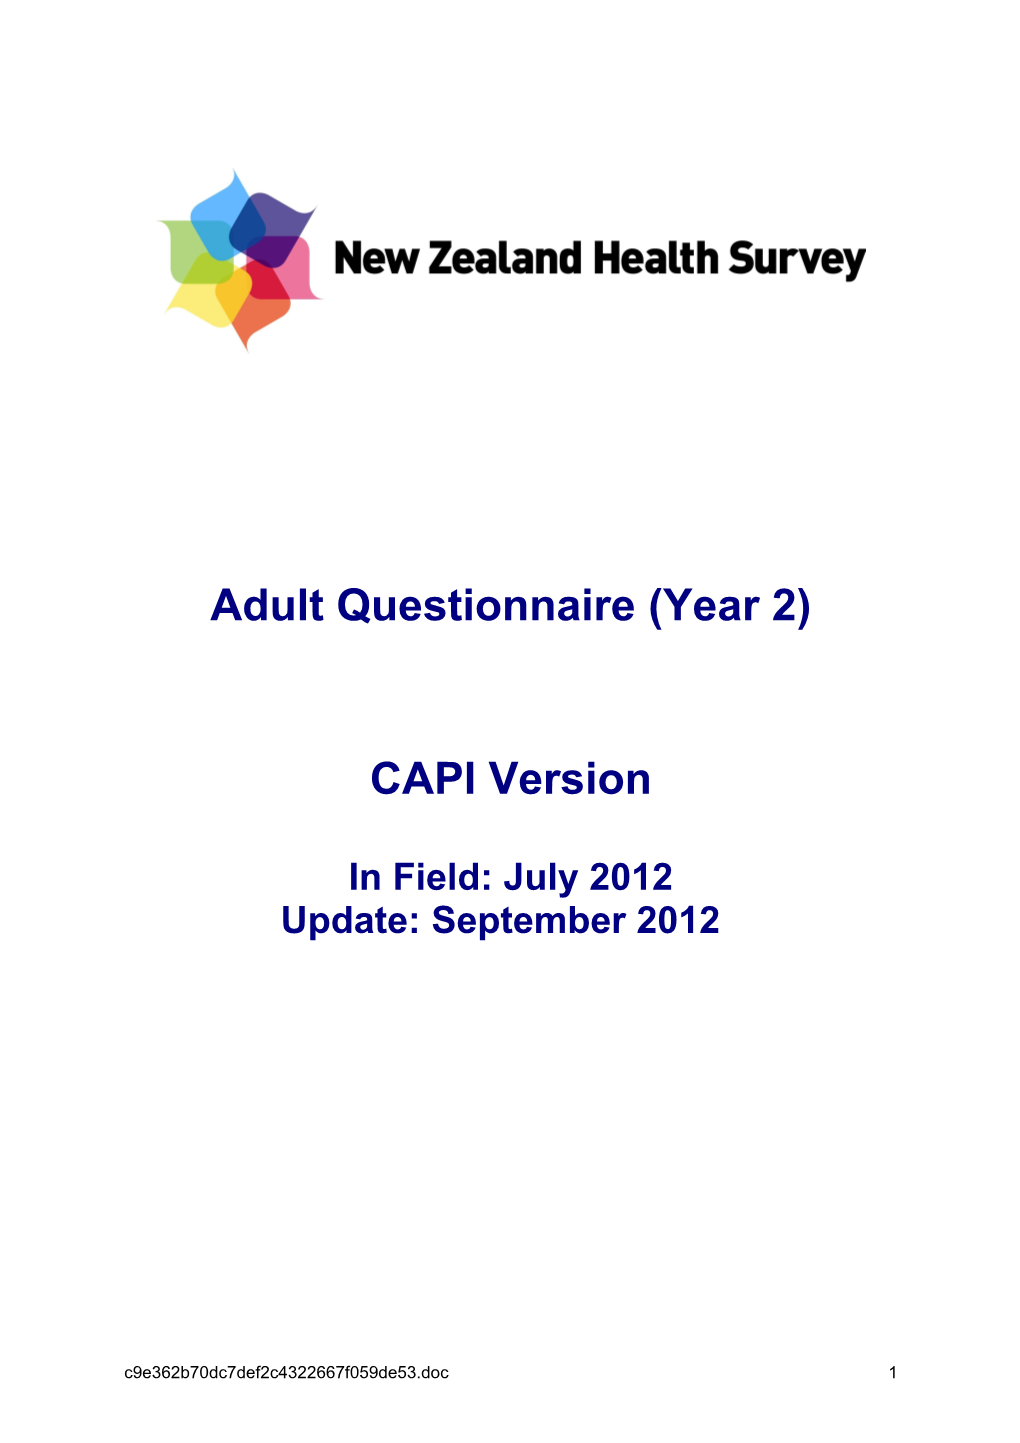 New Zealand Health Survey Adult Questionnaire (Year 2)